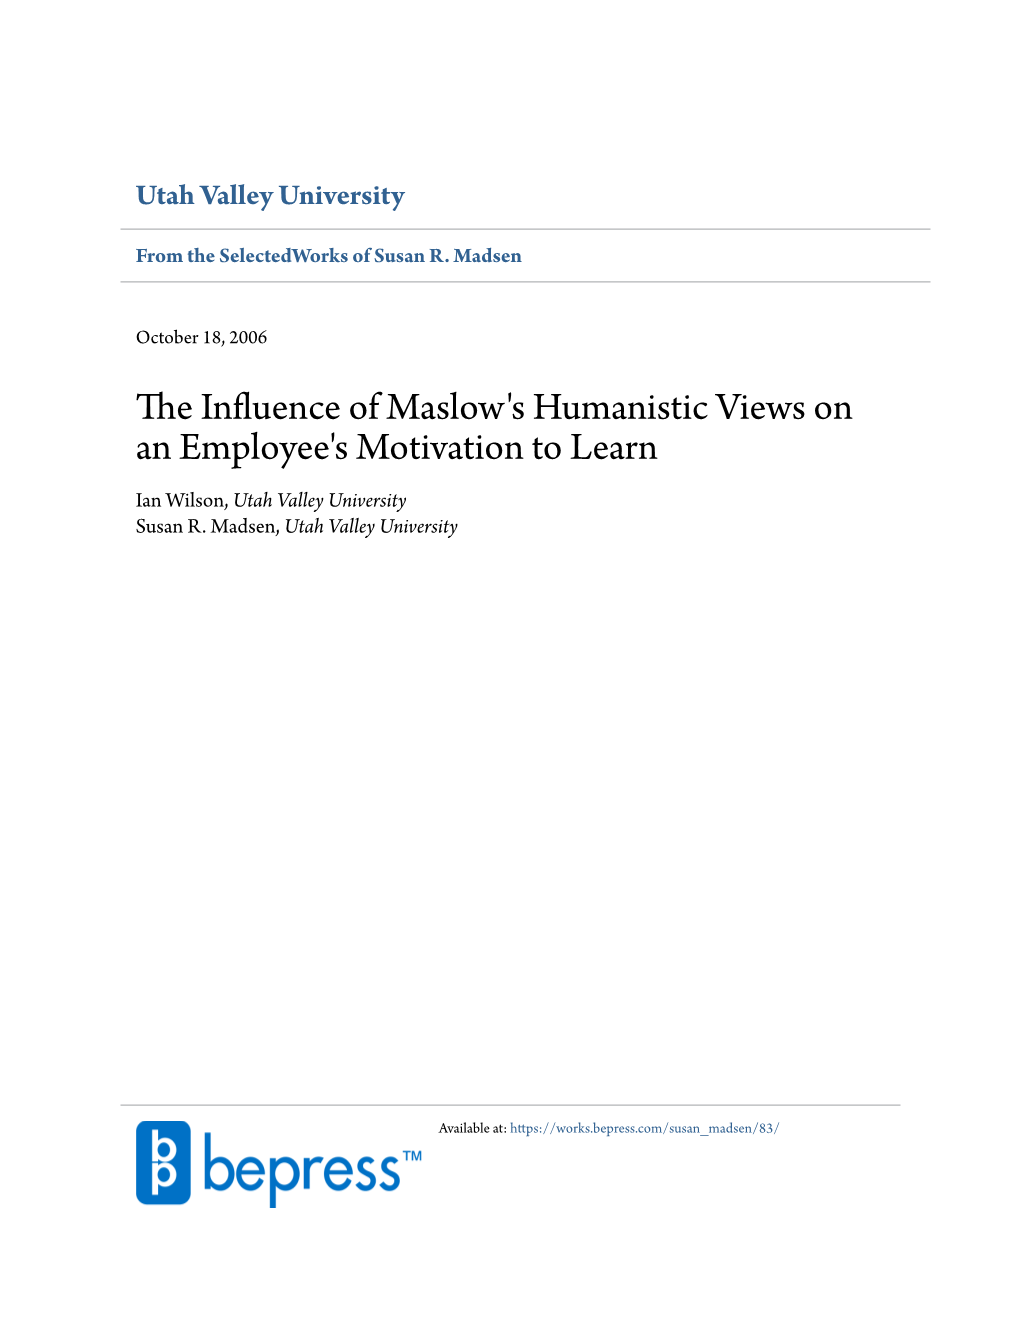 The Influence of Maslow's Humanistic Views on an Employee's Motivation